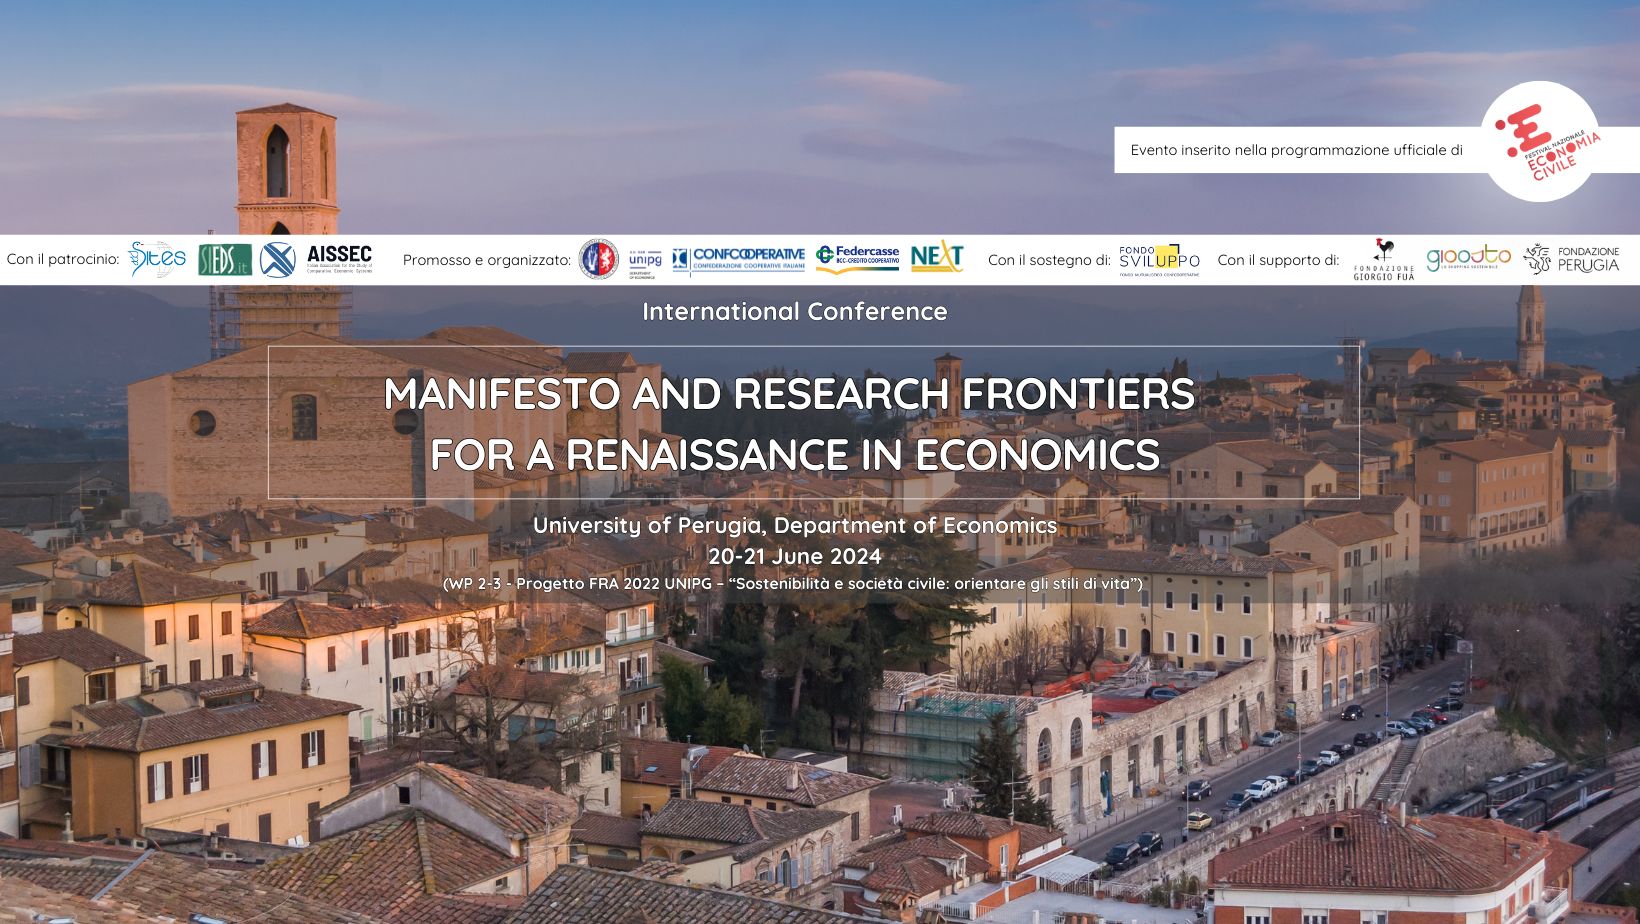 International Conference, “Manifesto and research frontiers for a Renaissance in Economics”